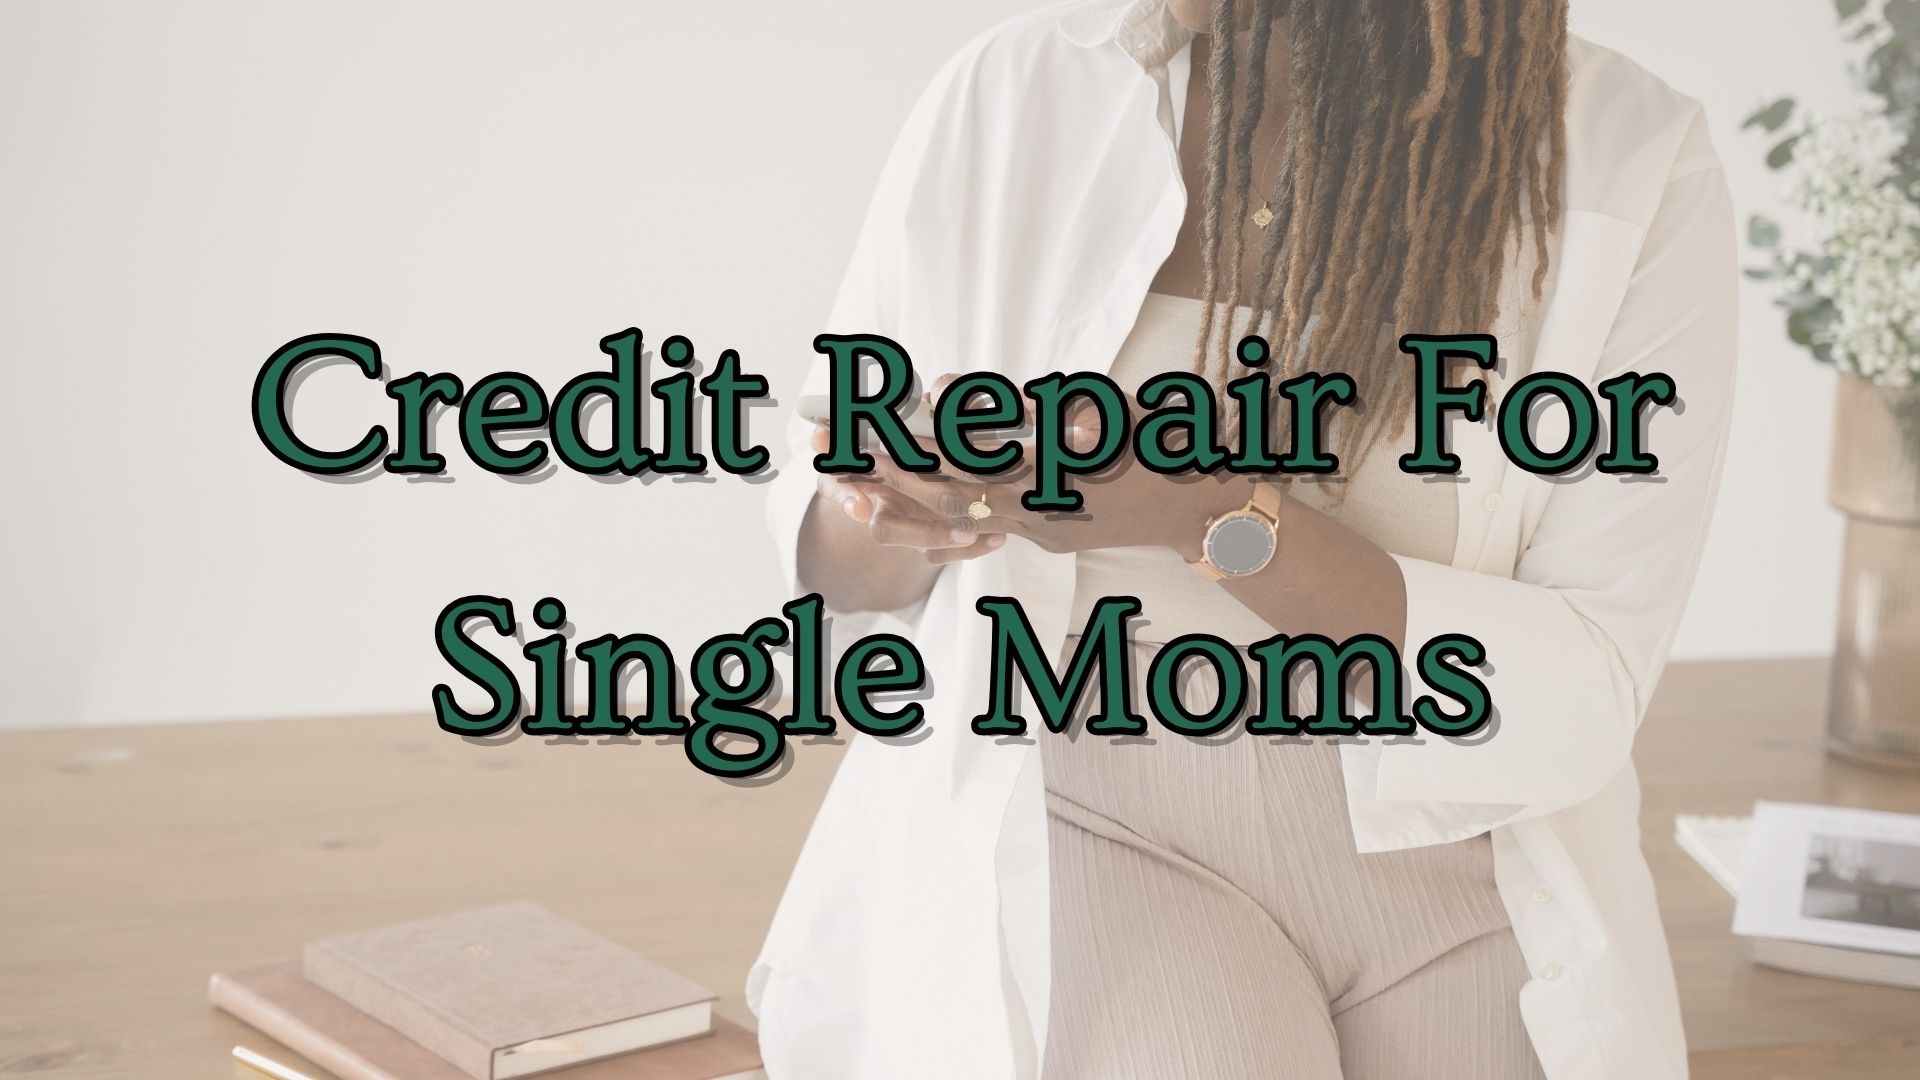 Why It “Pays” For Single Moms To Have A Good Credit Score